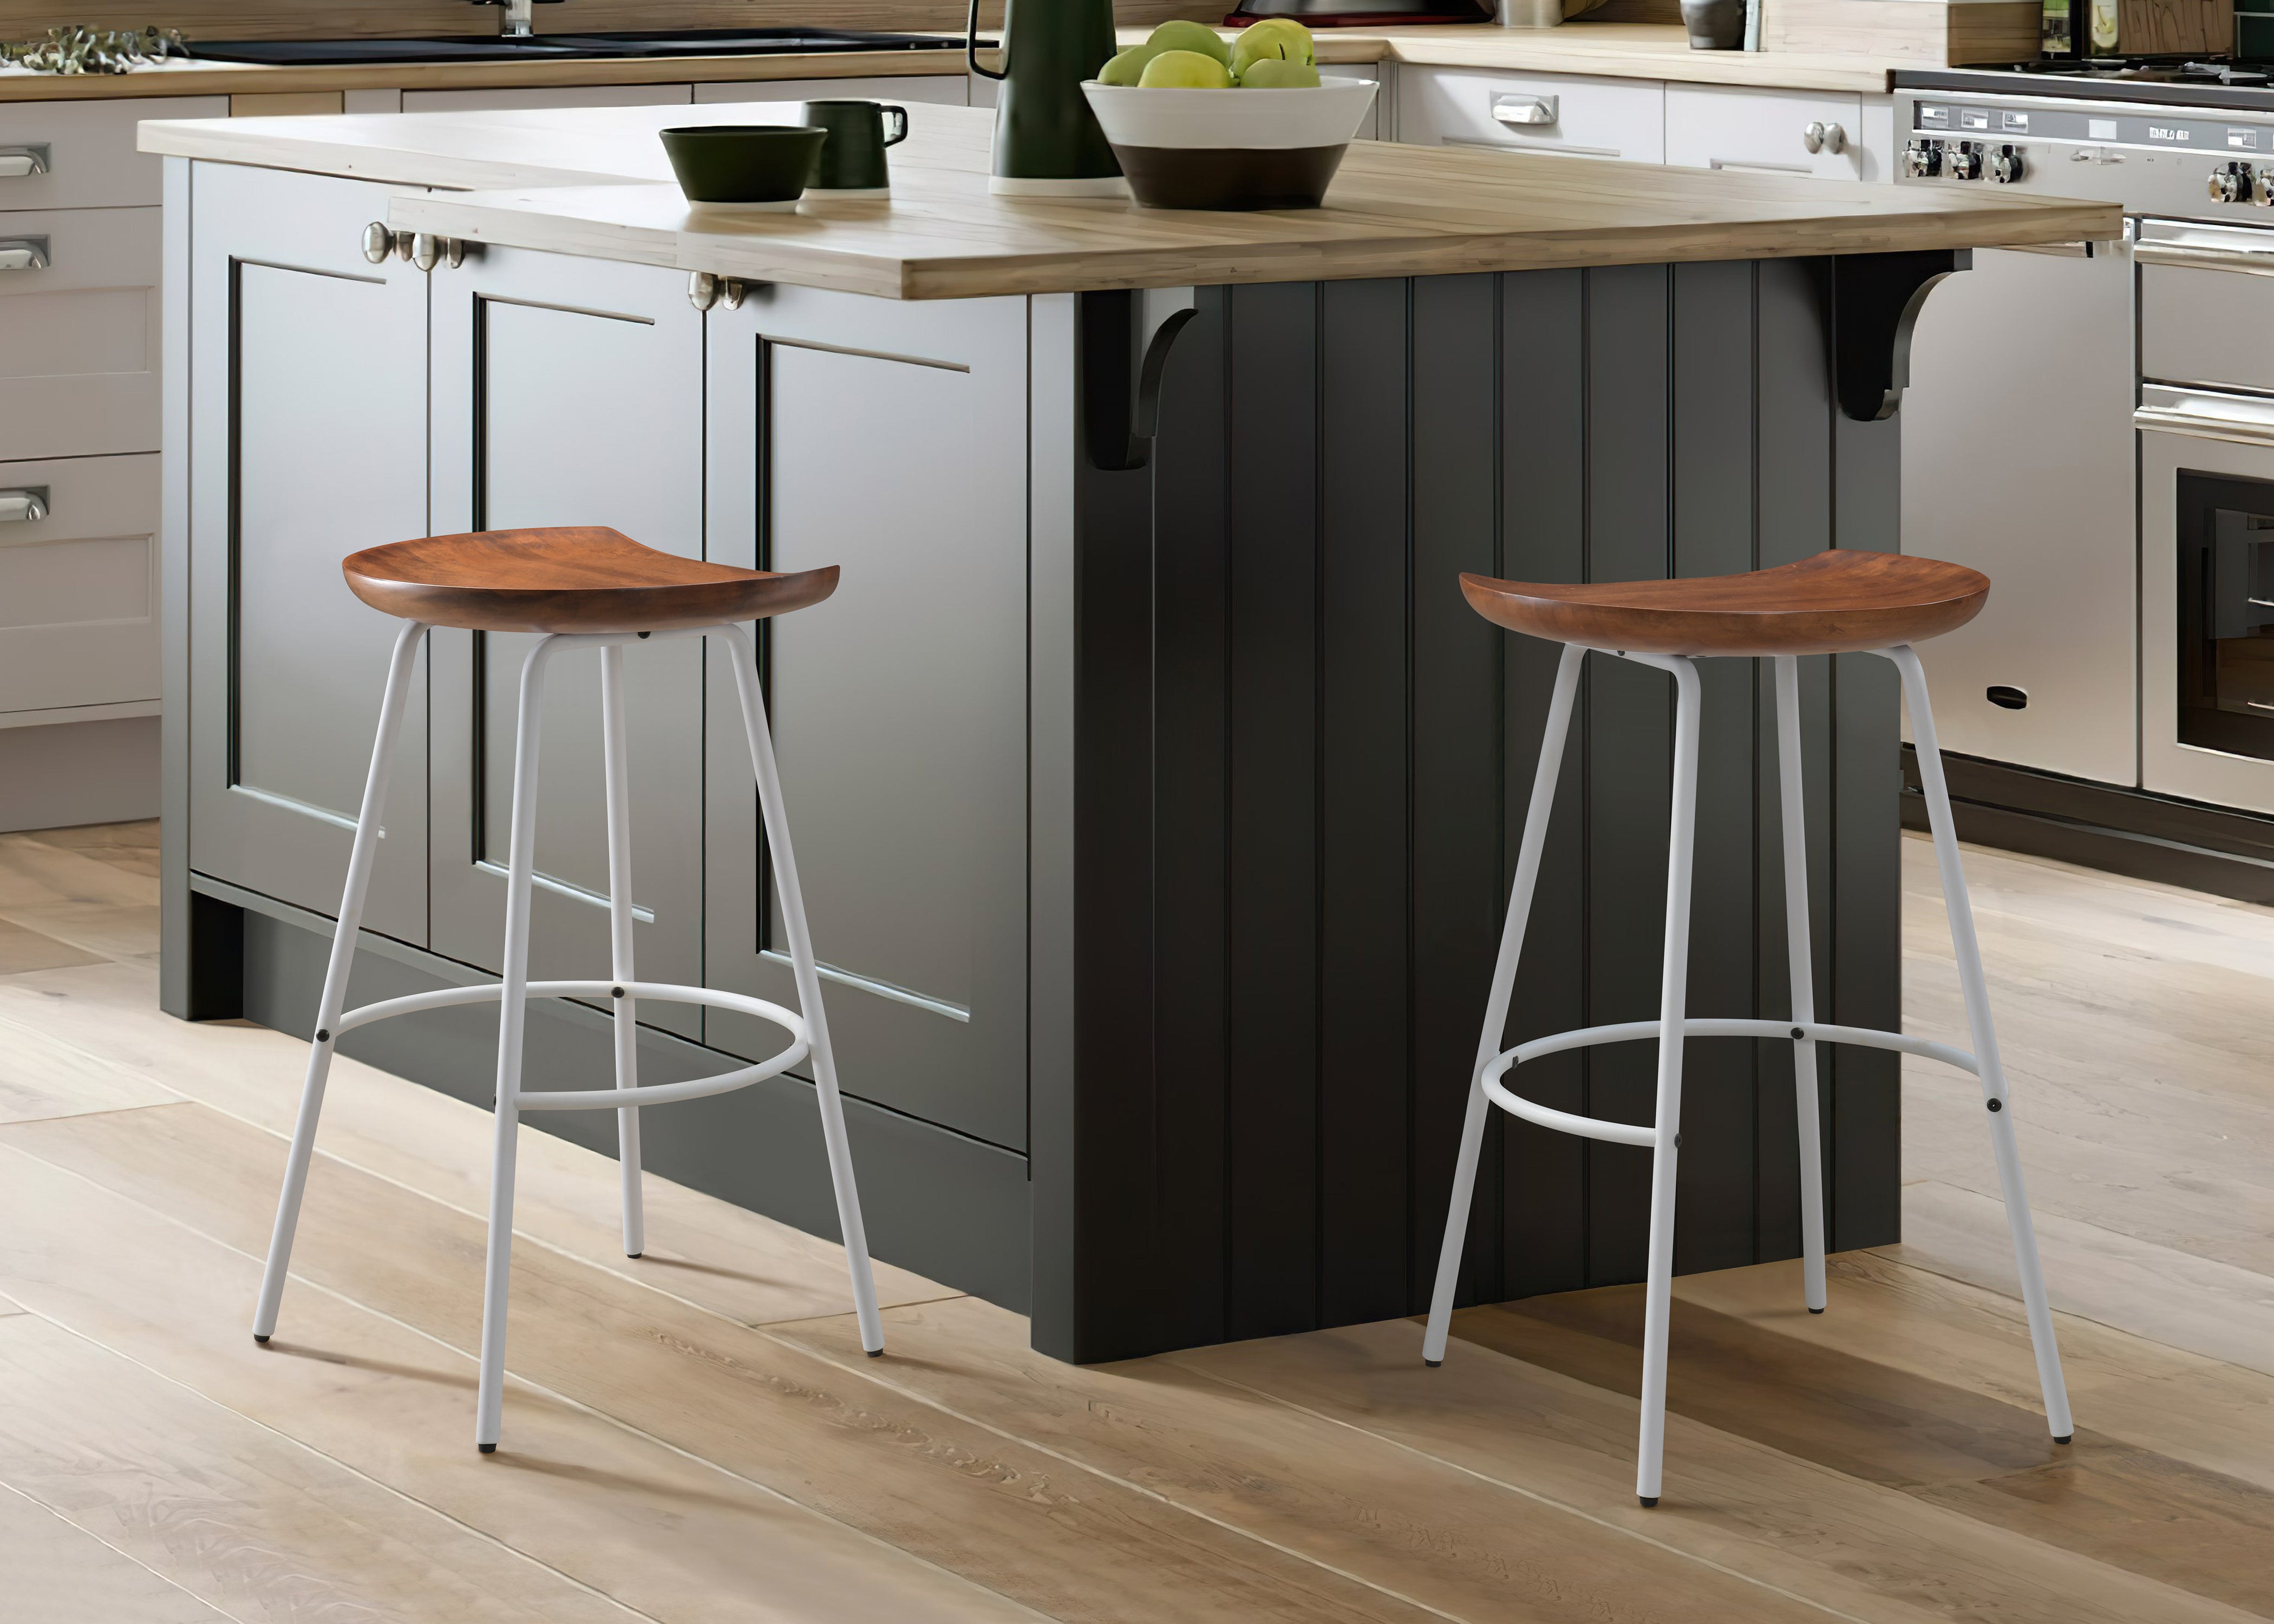 LuXeo Milano Barstool with Walnut Solid Wood Seat Finish (Set of 2)